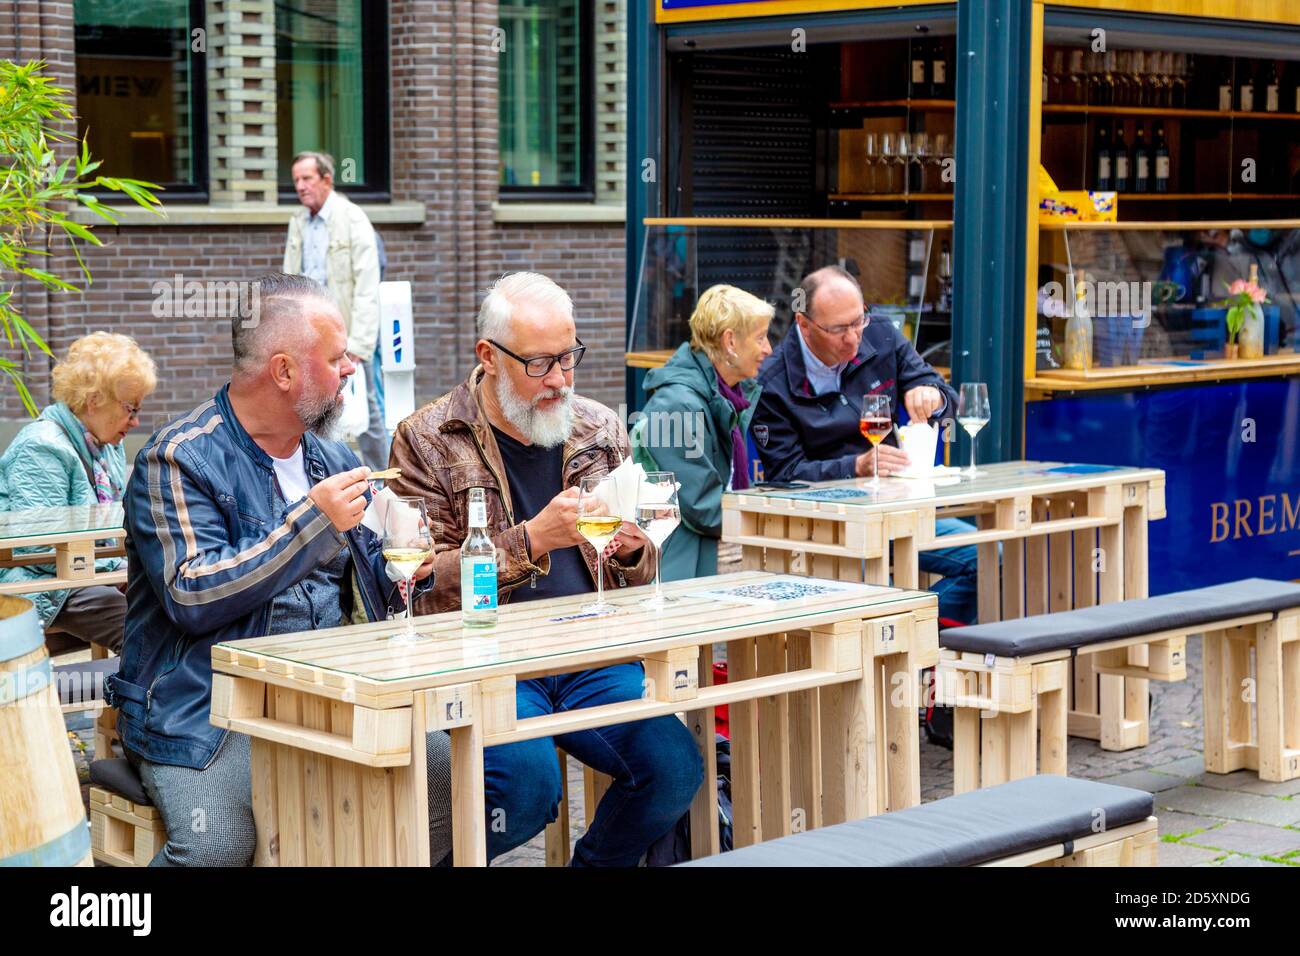 People drinking wine and eating al fresco by the Wine Box stall in the market square, Bremen, Germany Stock Photo